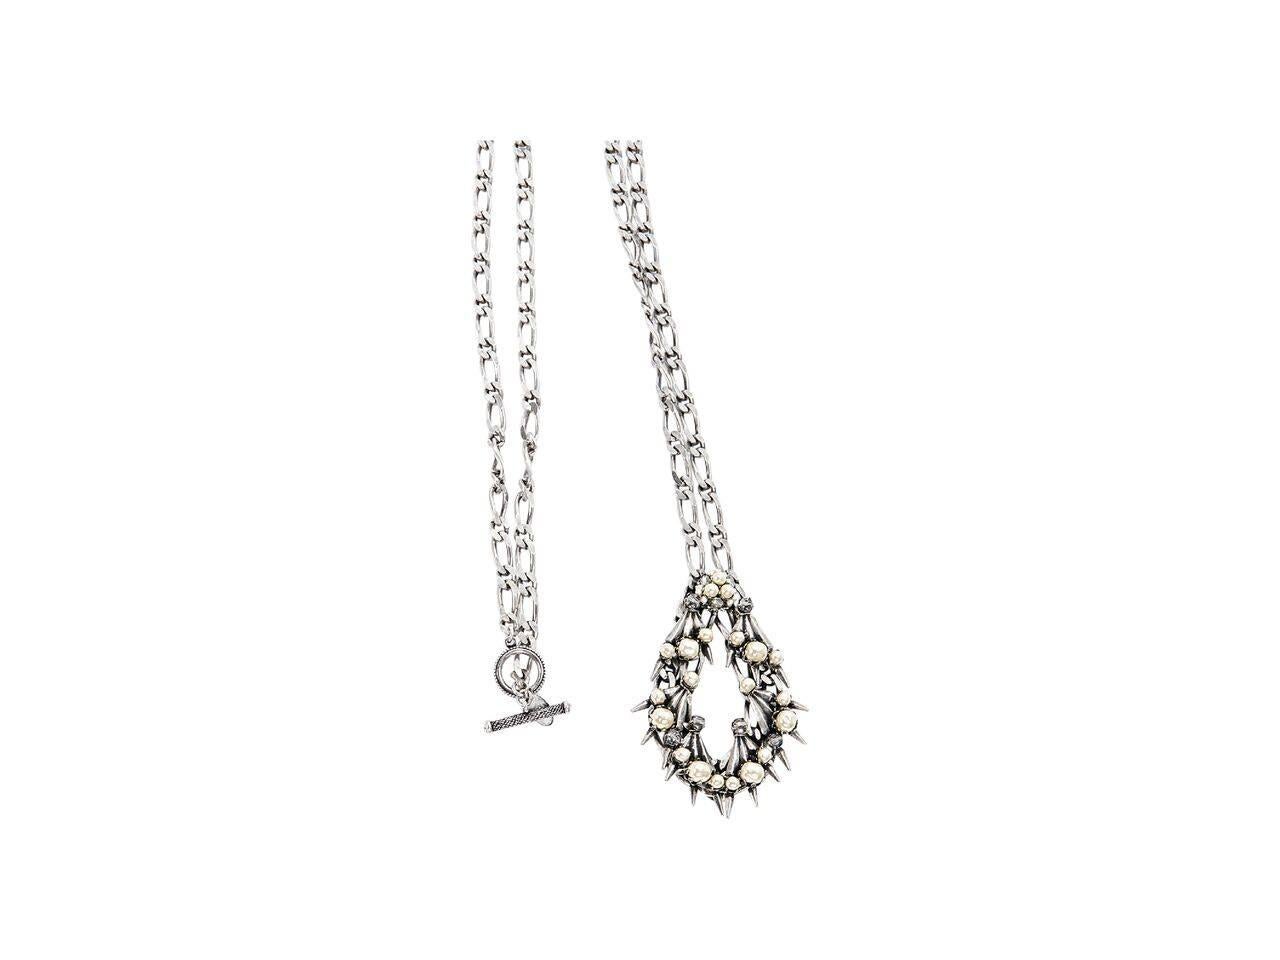 Product details:  Silver pendant necklace by Miriam Haskell.  Open teardrop pendant embellished with pearls and studs.  Toggle closure.
Condition: Pre-owned. Very good.
Est. Retail $ 498.00